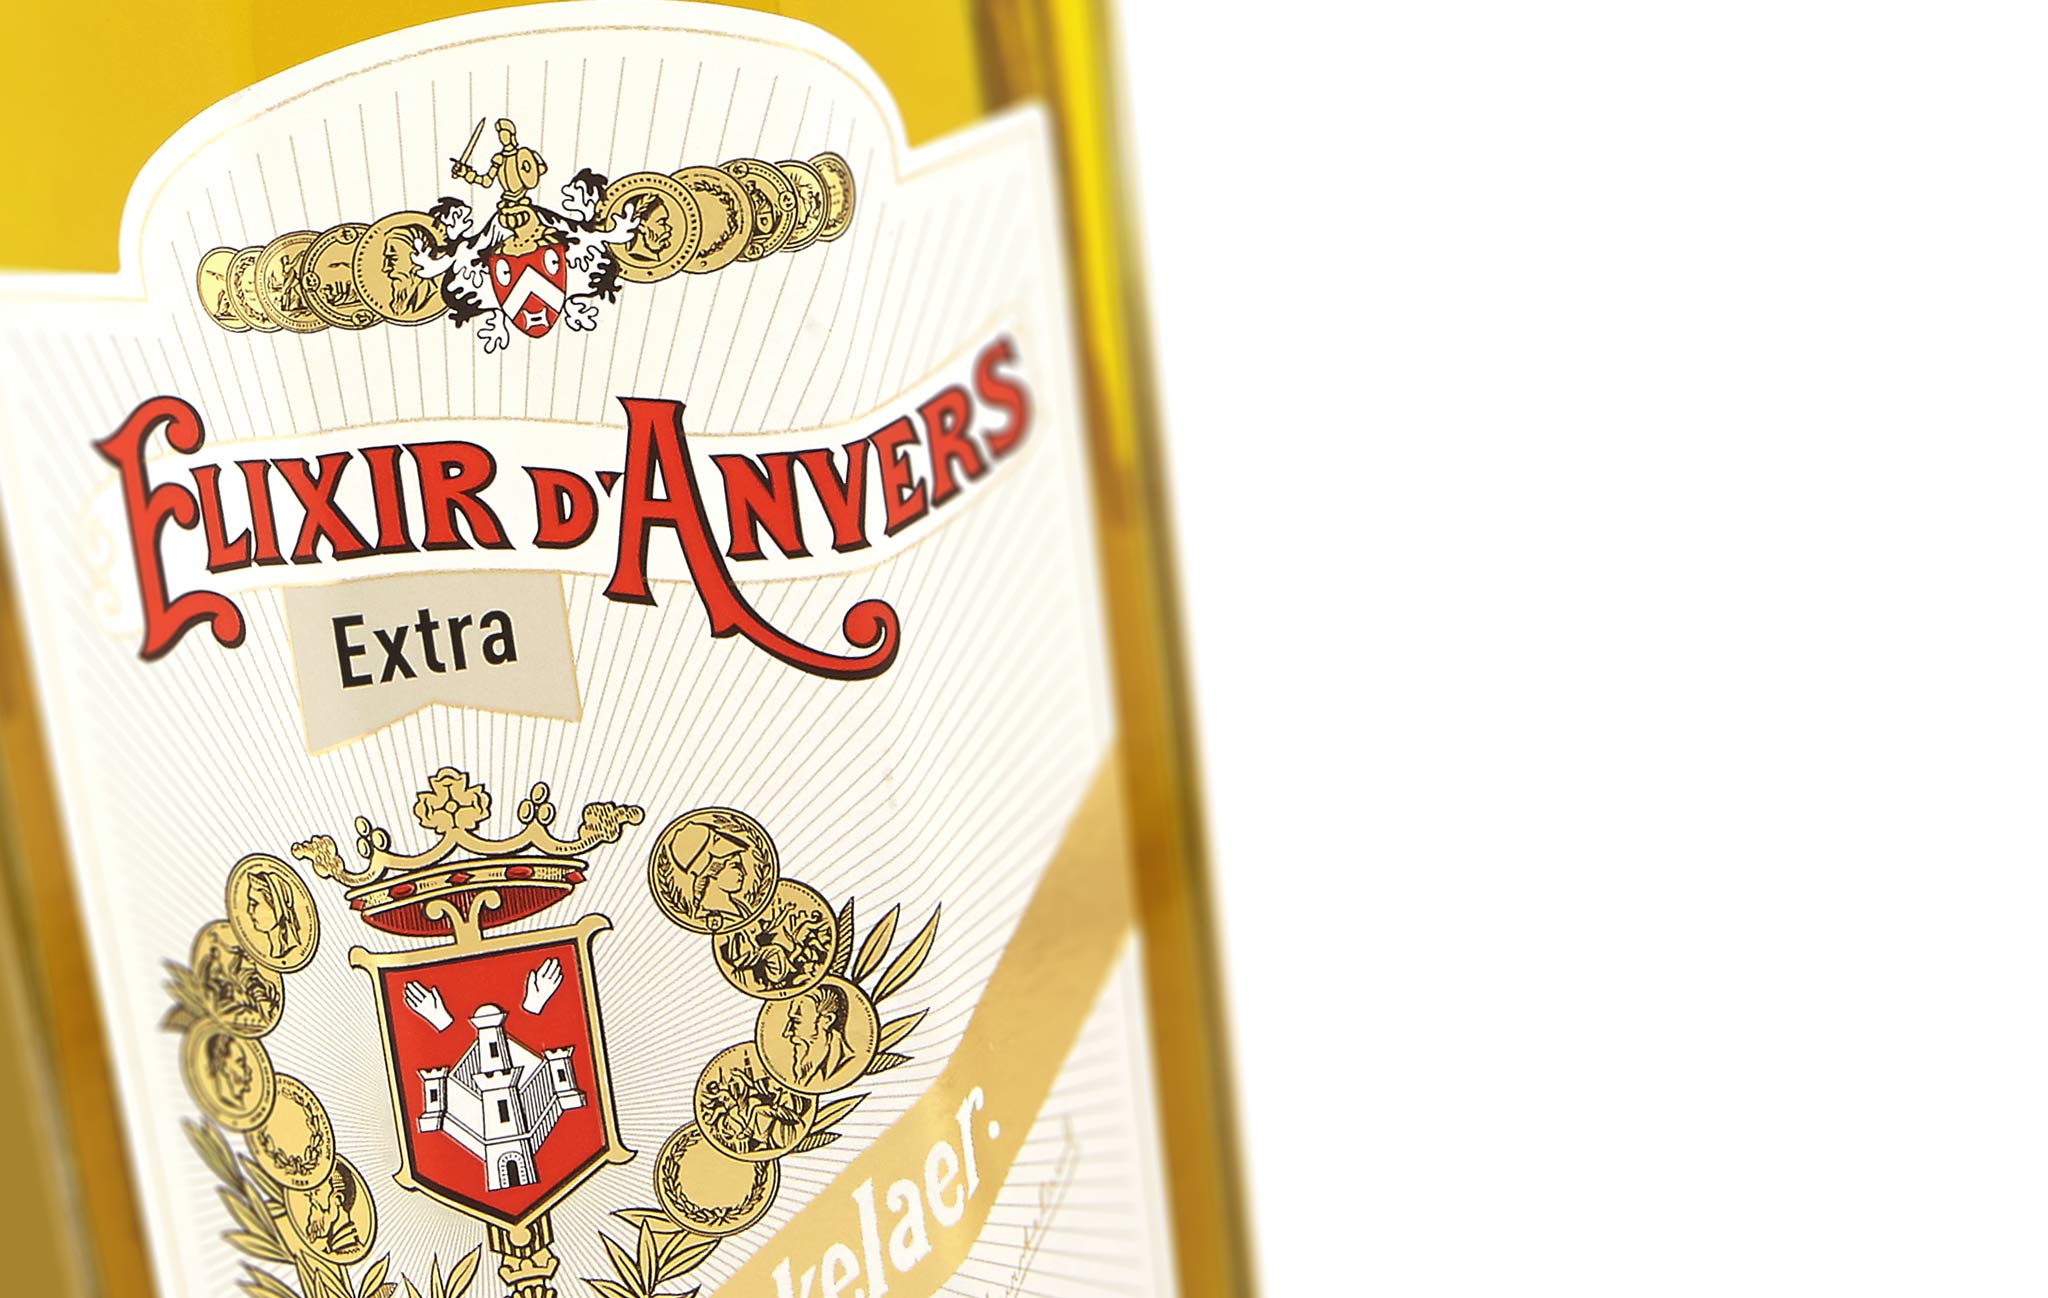 Elixir d’Anvers Extra – limited edition!